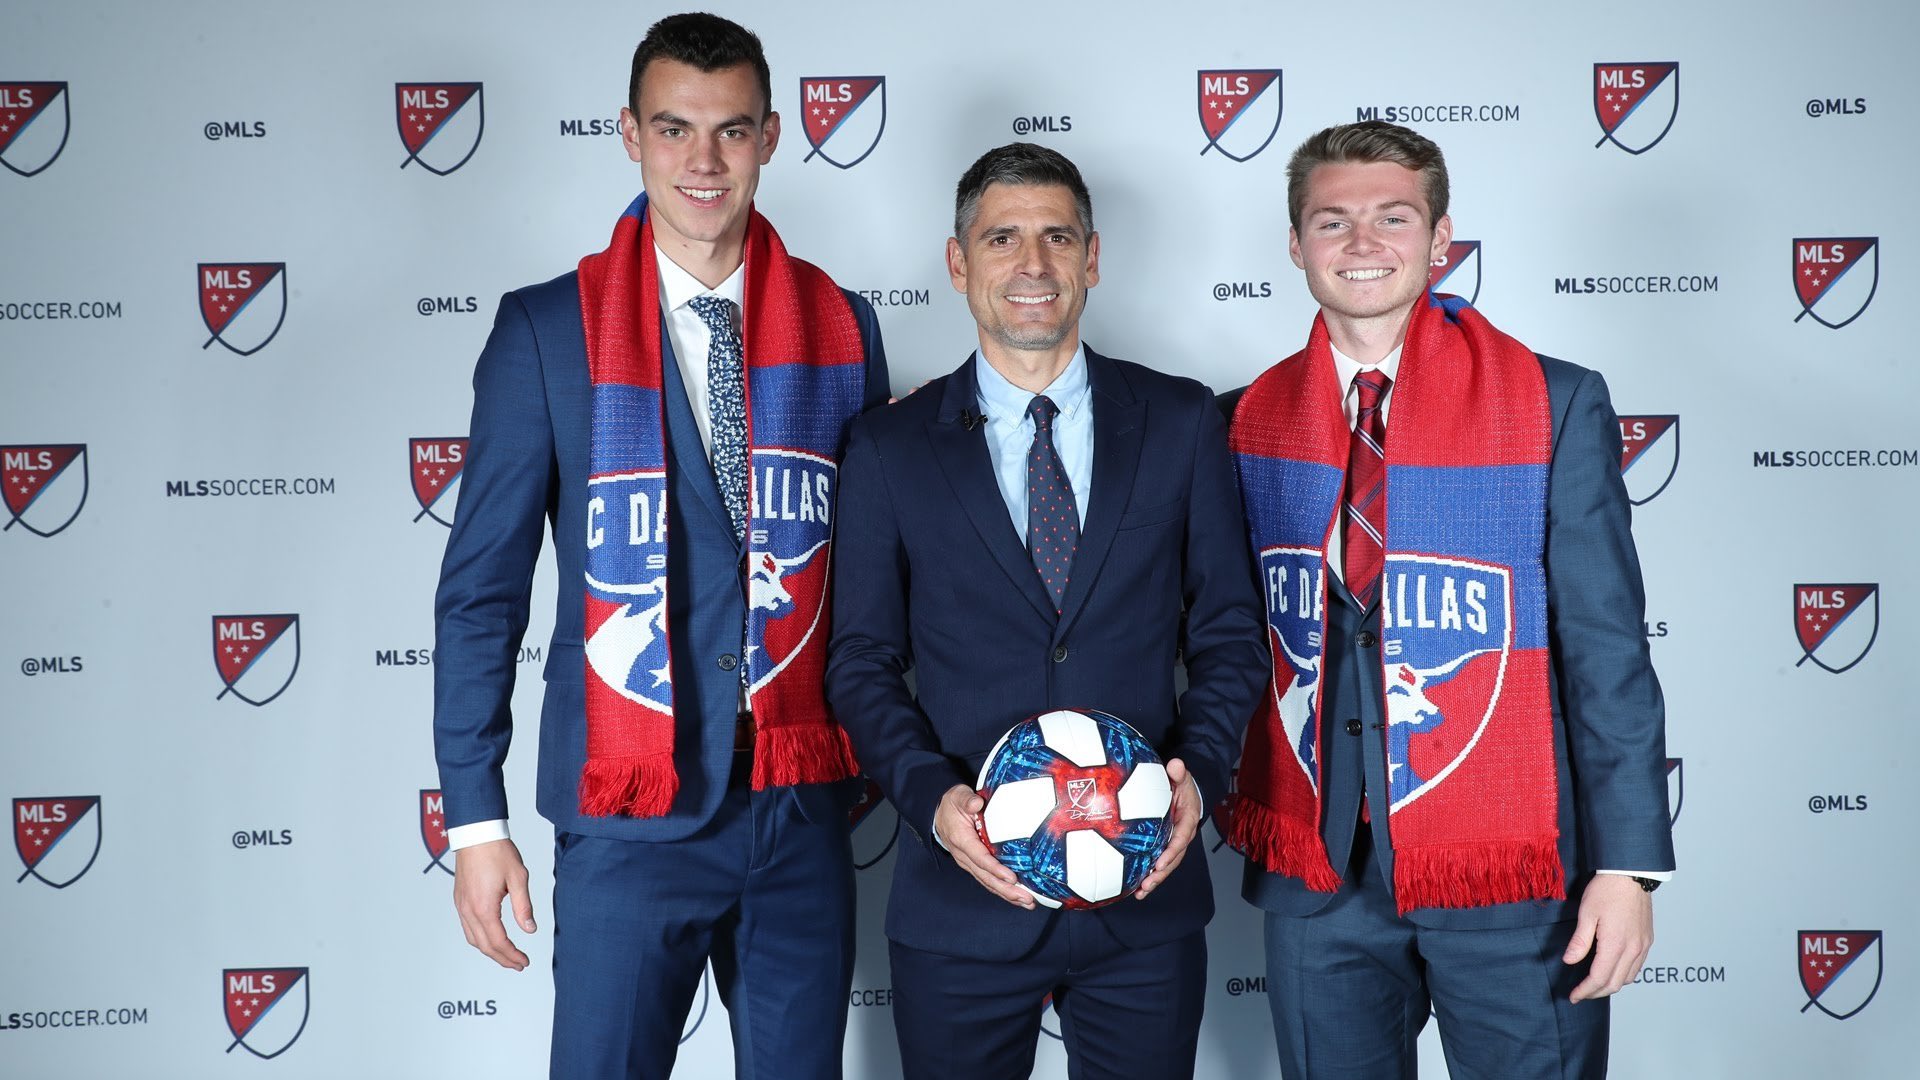 FC Dallas head coach Luchi Gonzalez stands alongside draftees Callum Montgomery (L) and Johnny Nelson (R) at the 2019 MLS SuperDraft in Chicago. (FC Dallas Communications)